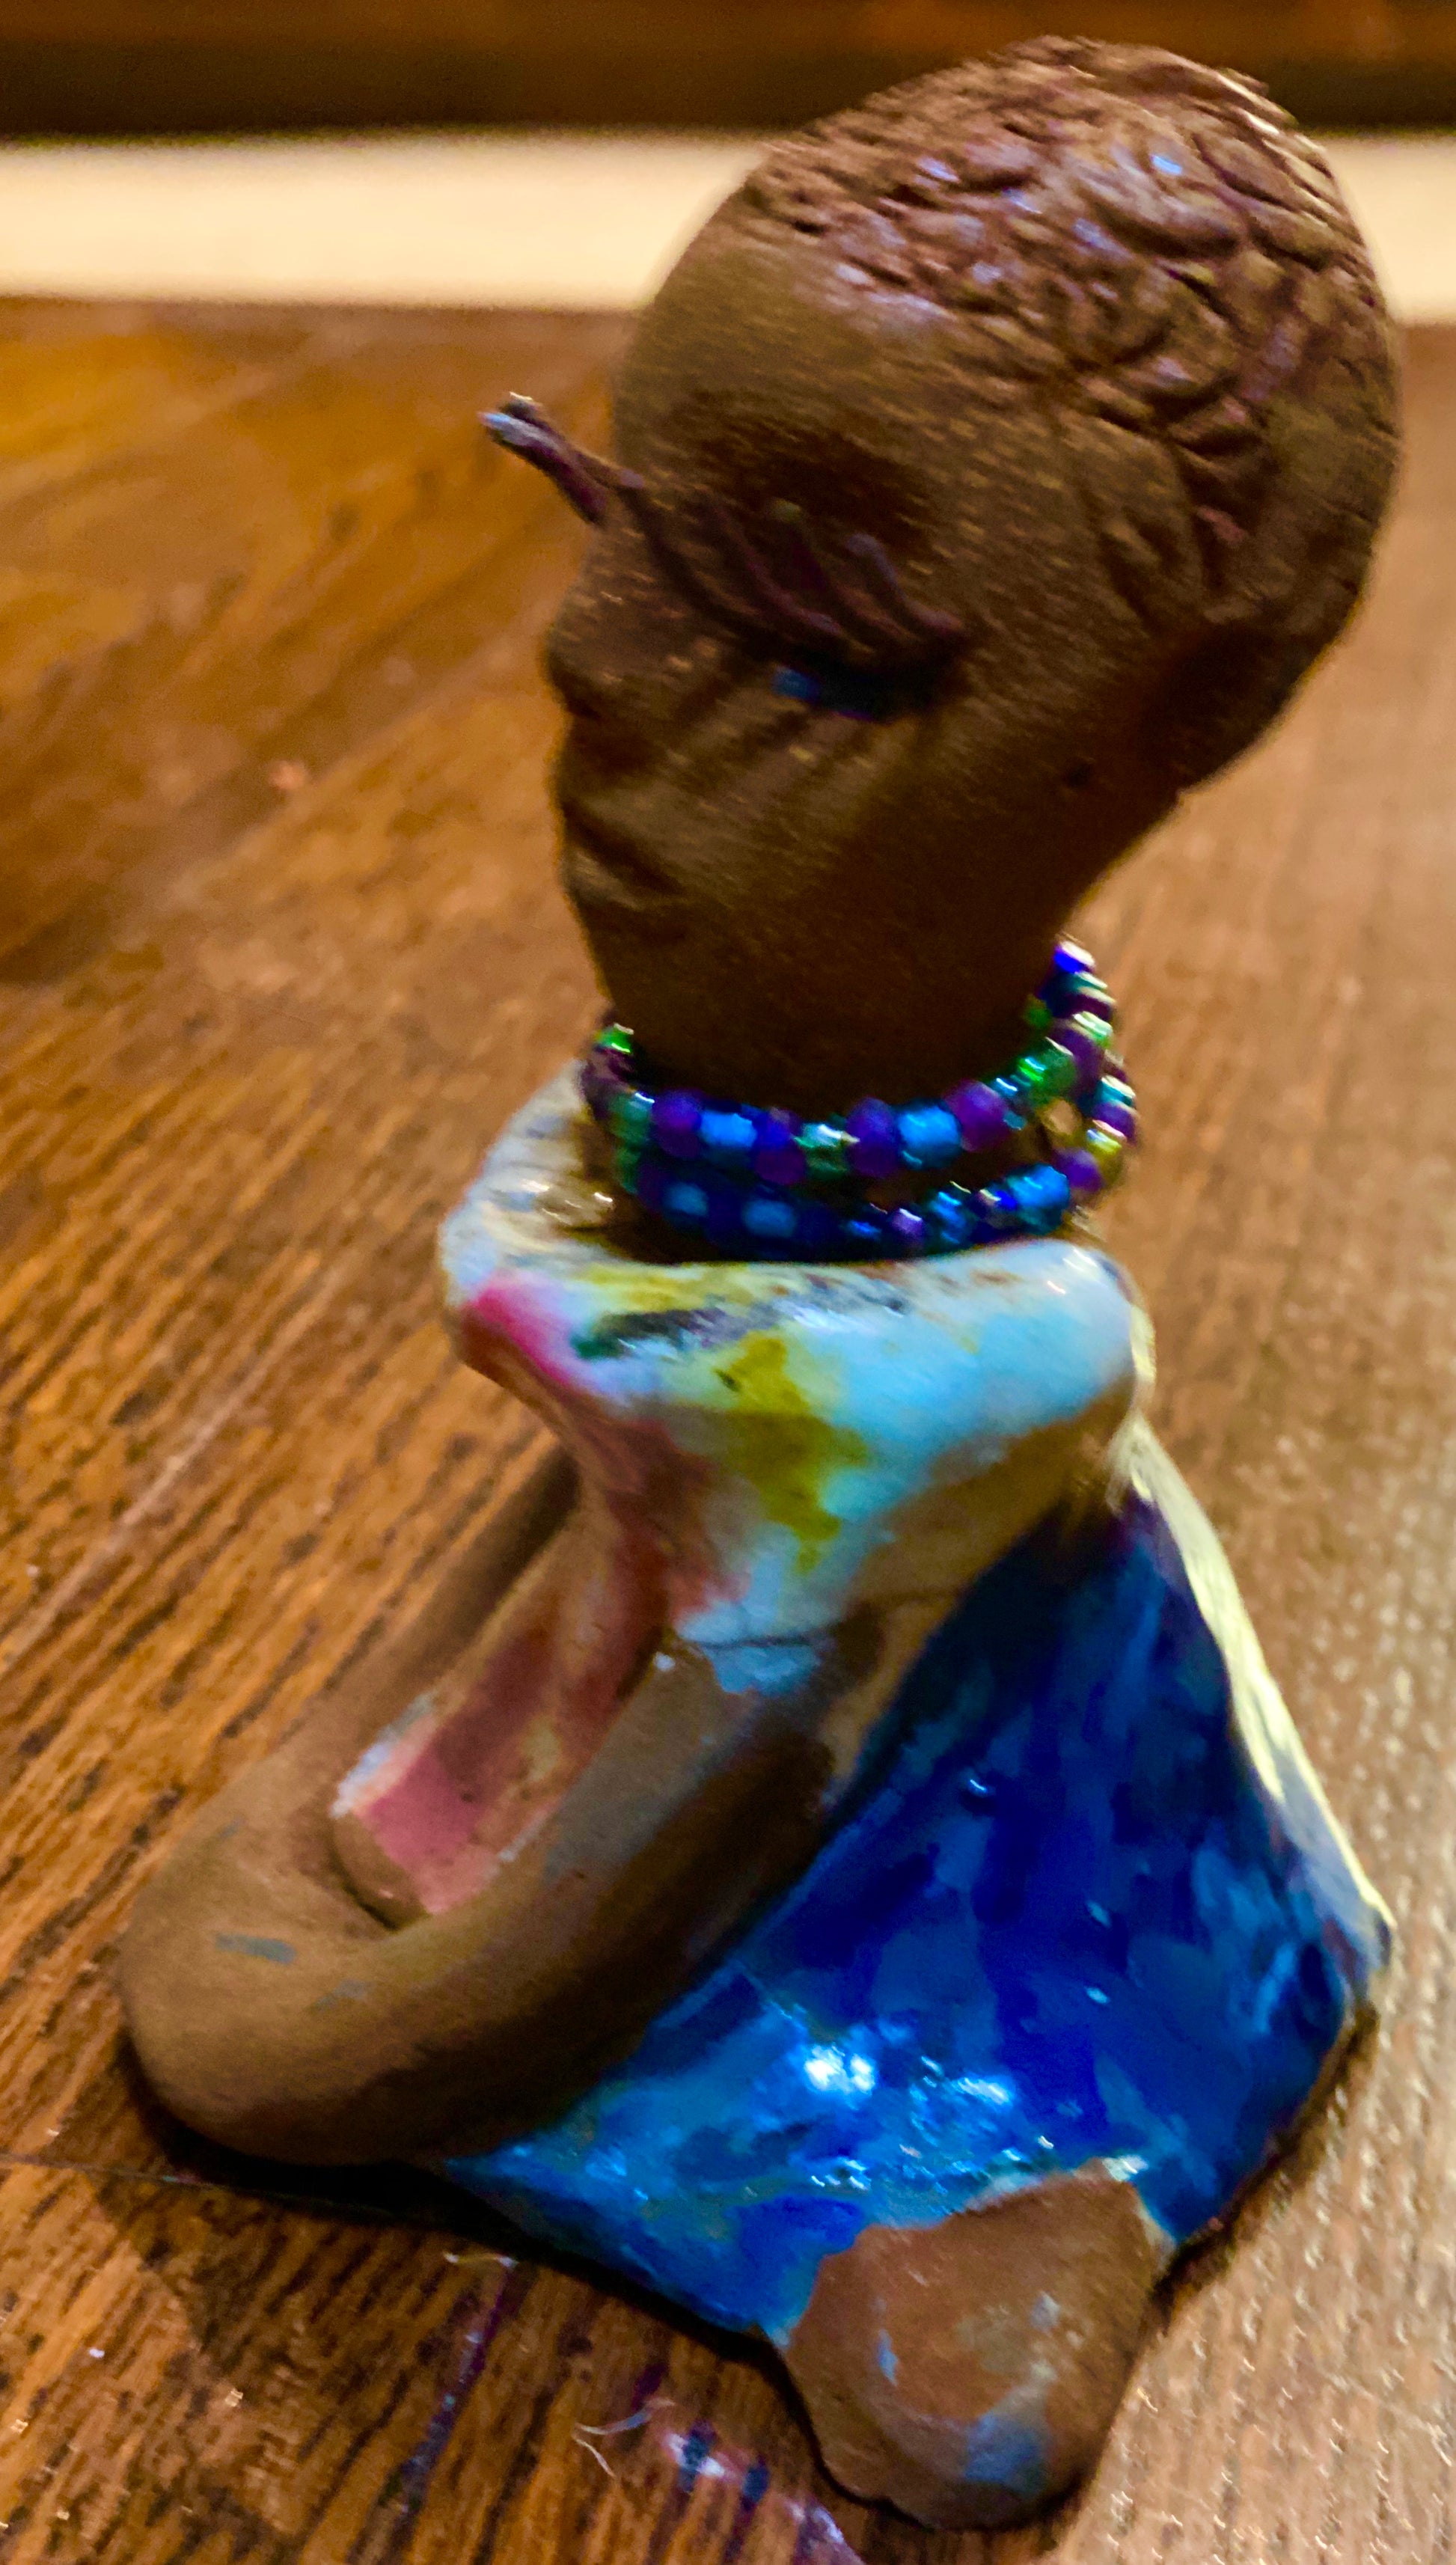 Riley stands 5" x 5”x 3" and weighs  11 ozs.  Riley has a lovely multicolored glossy dress with a matching beaded necklace.  She has long lashes!  Riley appears to sit in a yoga pose. Her long arms rest at her side.